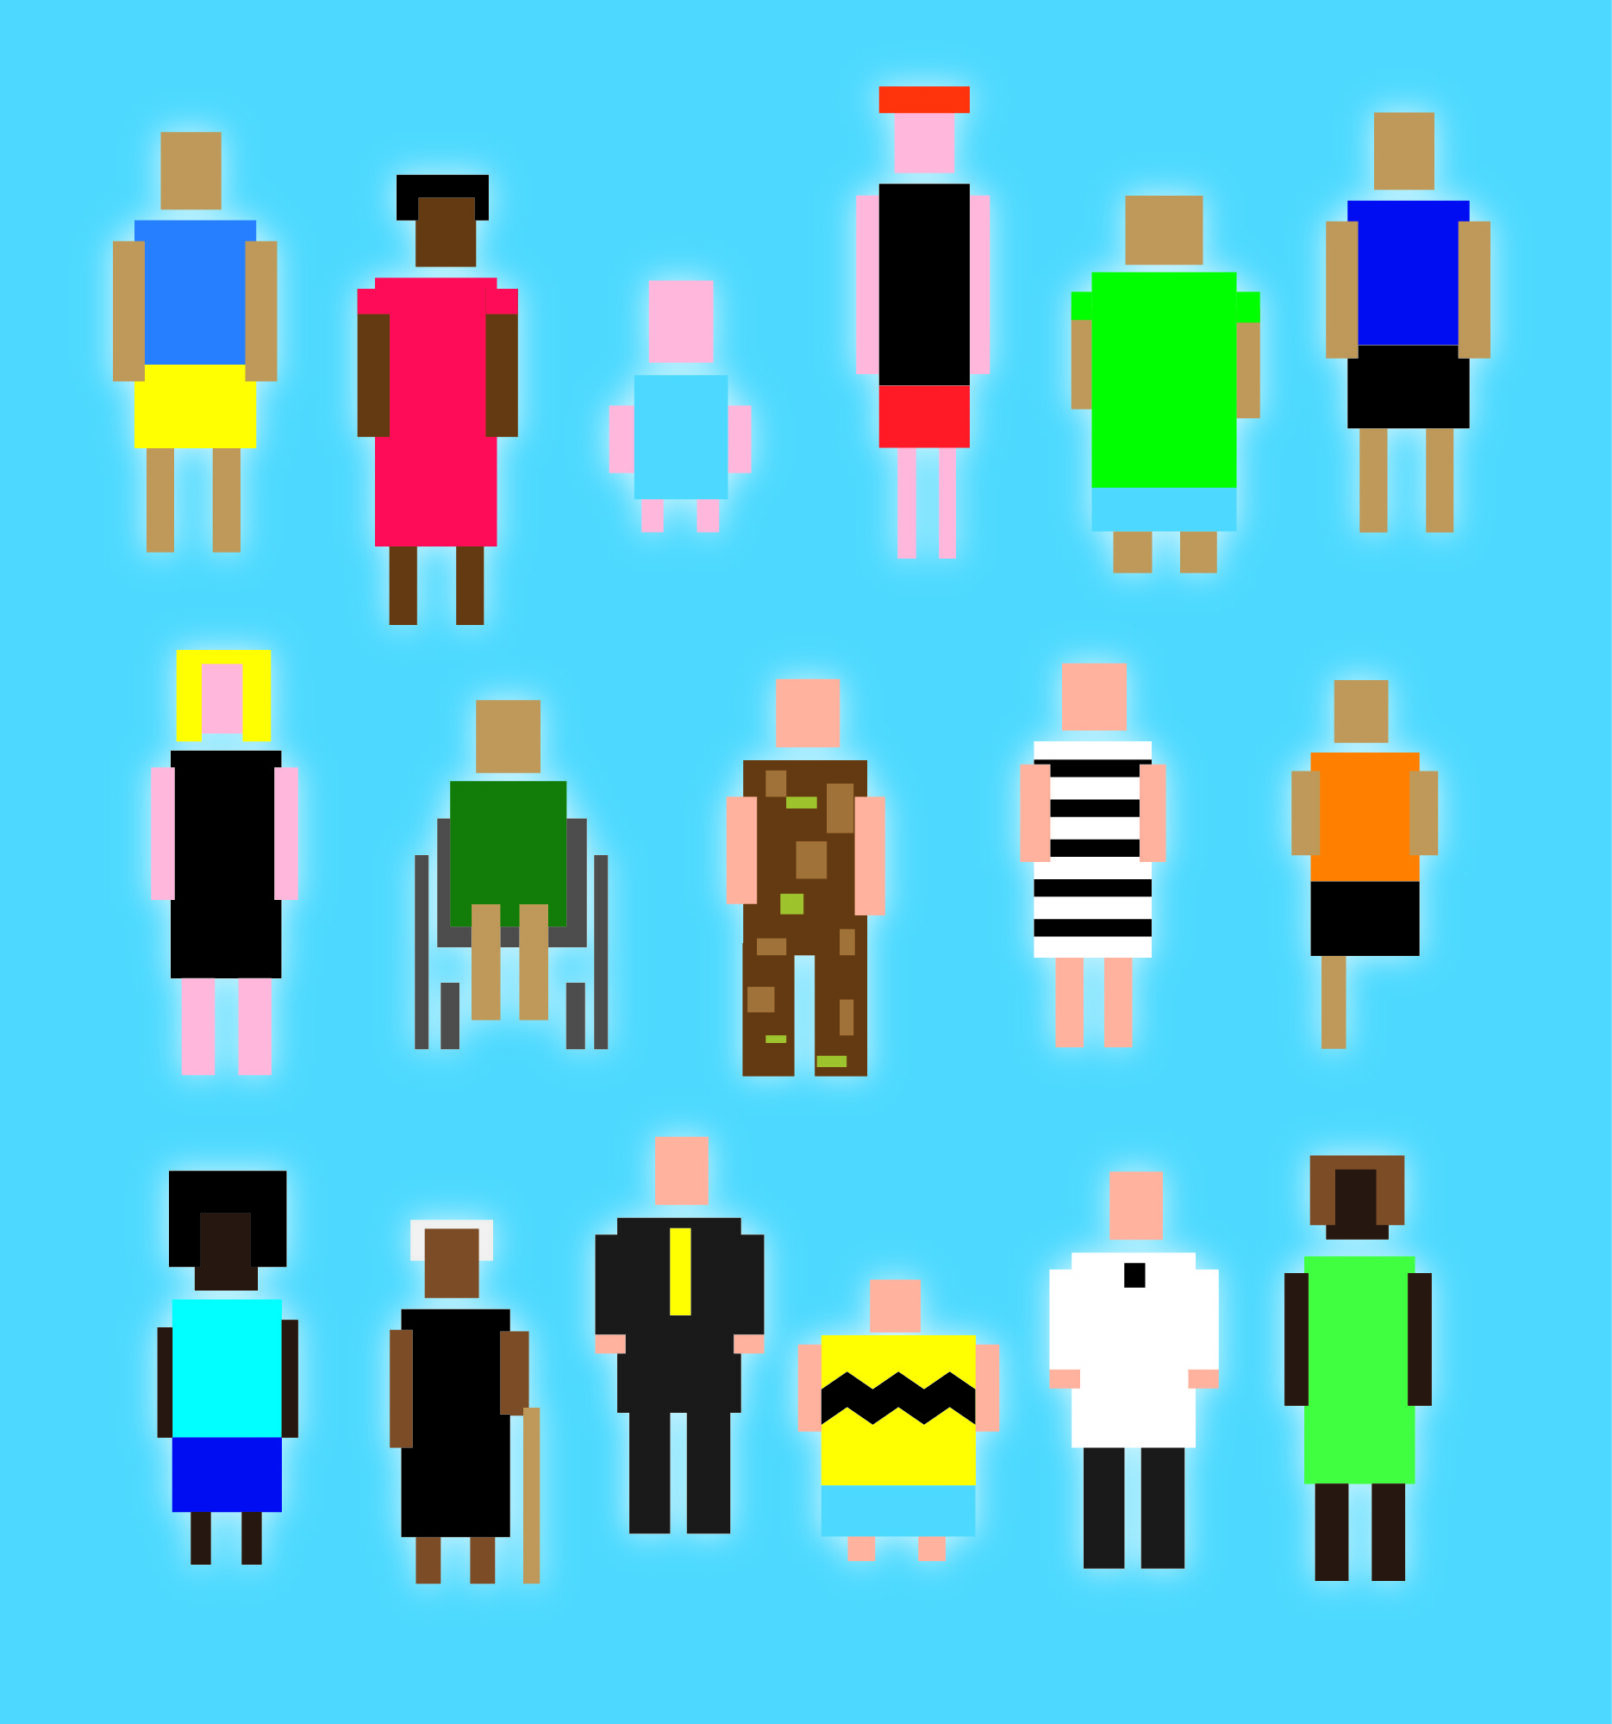 Variety of human figures made to look like 8-bit low resolution graphics